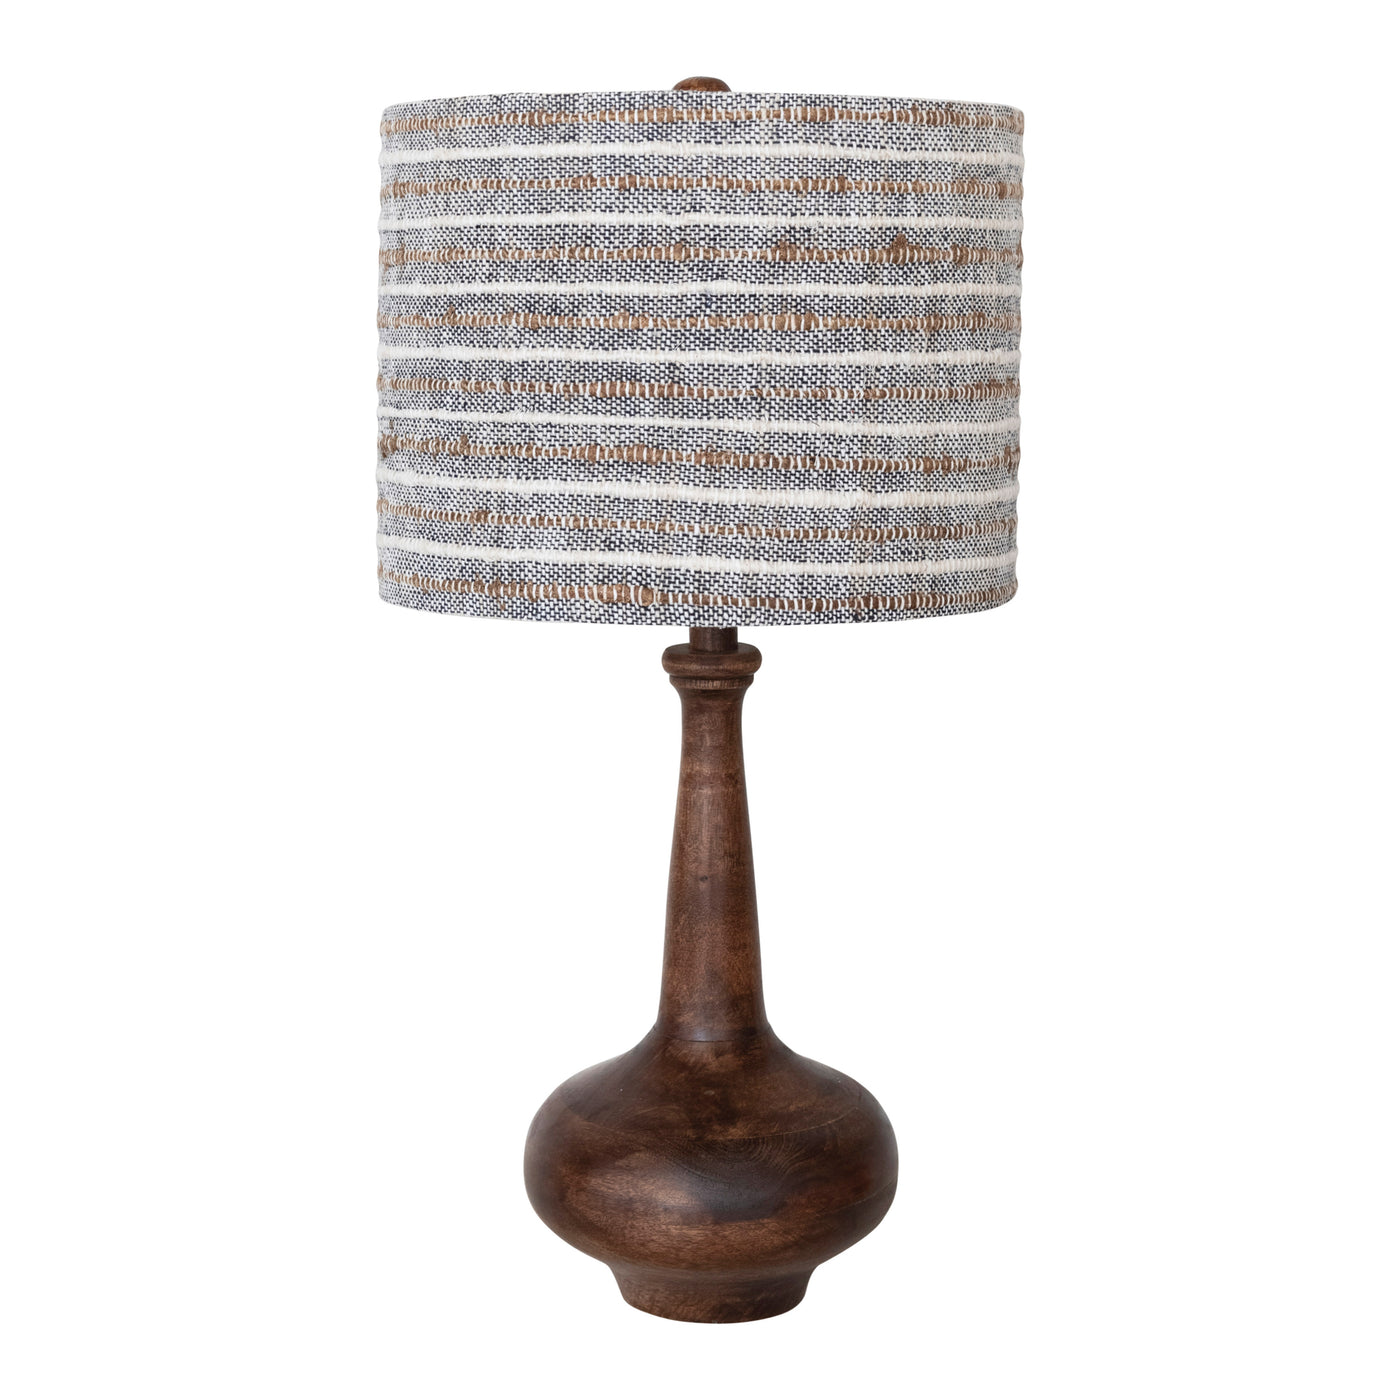 Mango Wood Table Lamp with Striped Shade